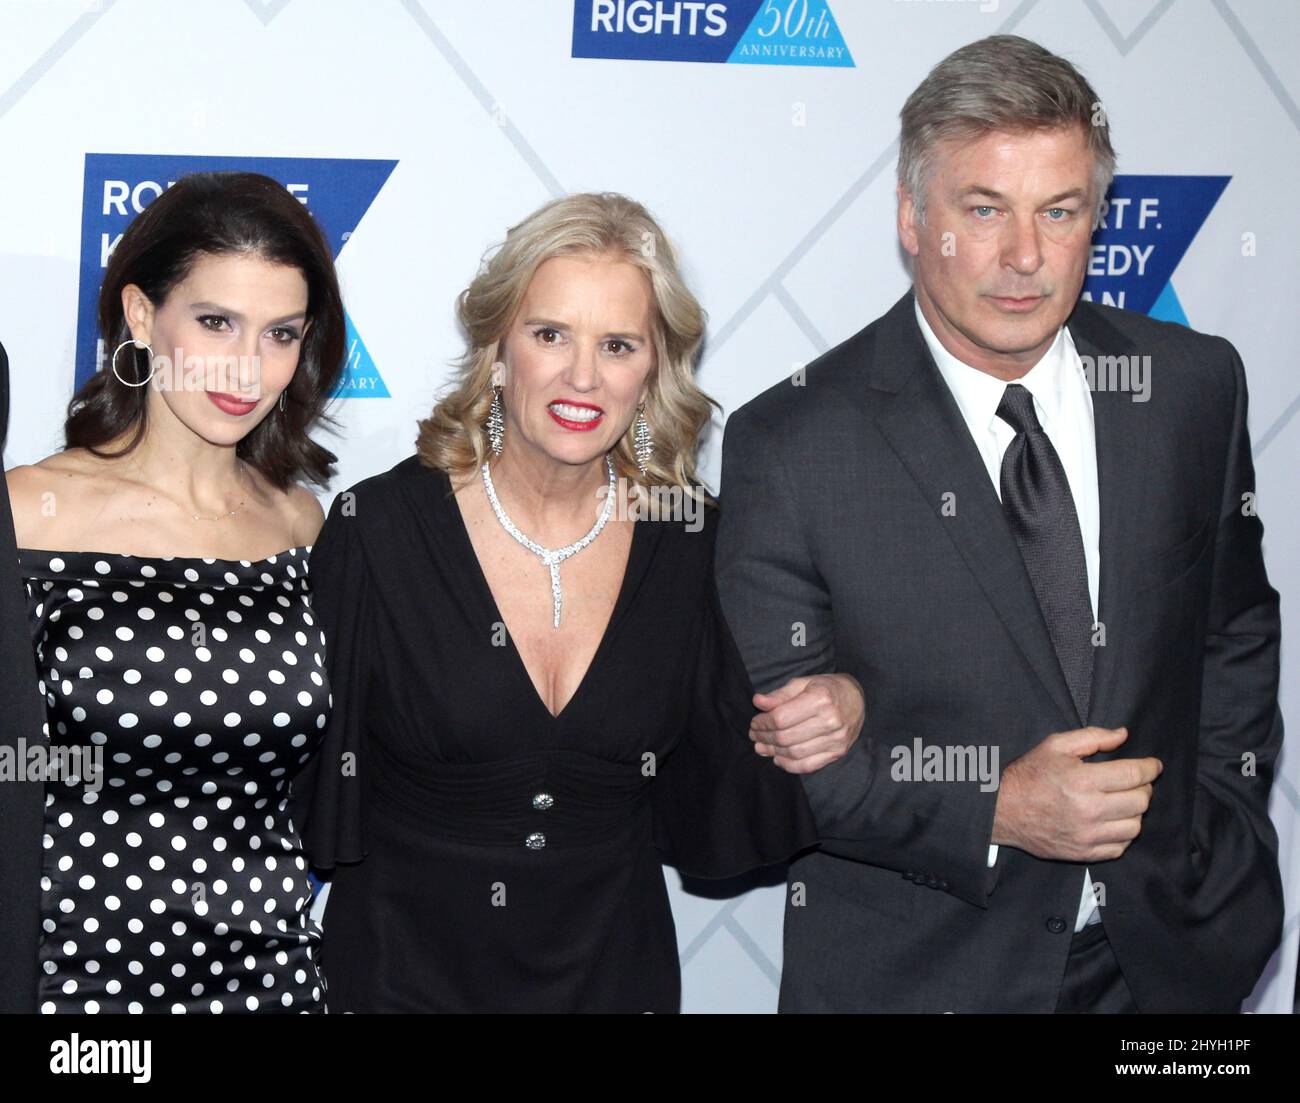 Hilaria Baldwin, Kerry Kennedy & Alec Baldwin attending the 2018 Ripple of Hope Awards held at the New York Stock Photo